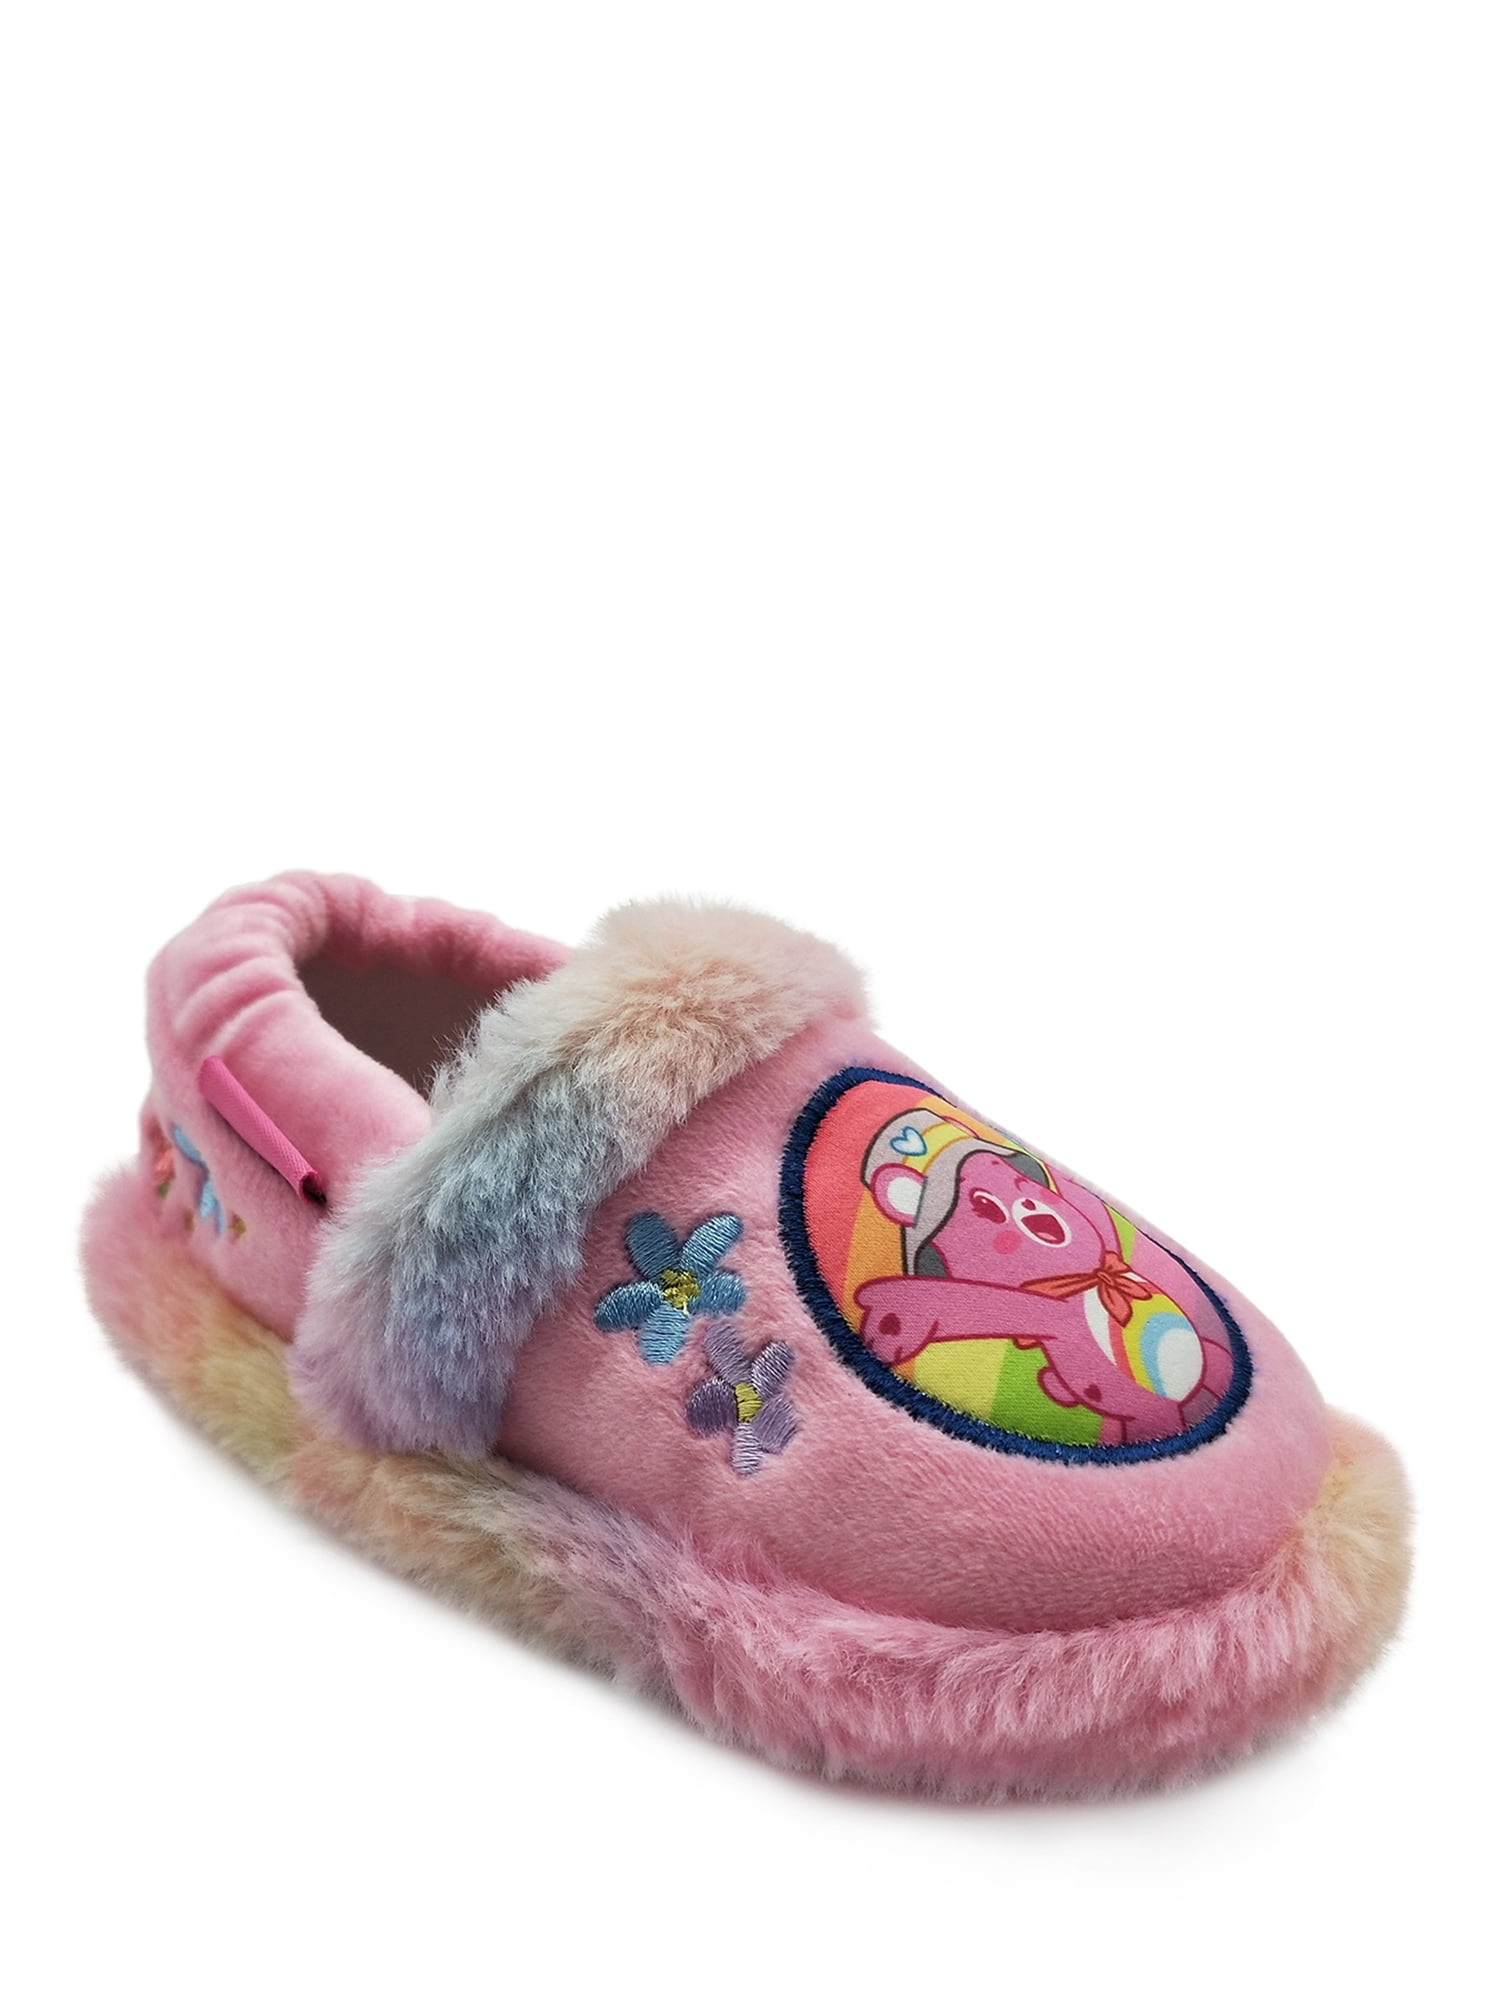 Paw Patrol Slippers Easy Touch Girls Character Booties Skye Everest Gift Kids 